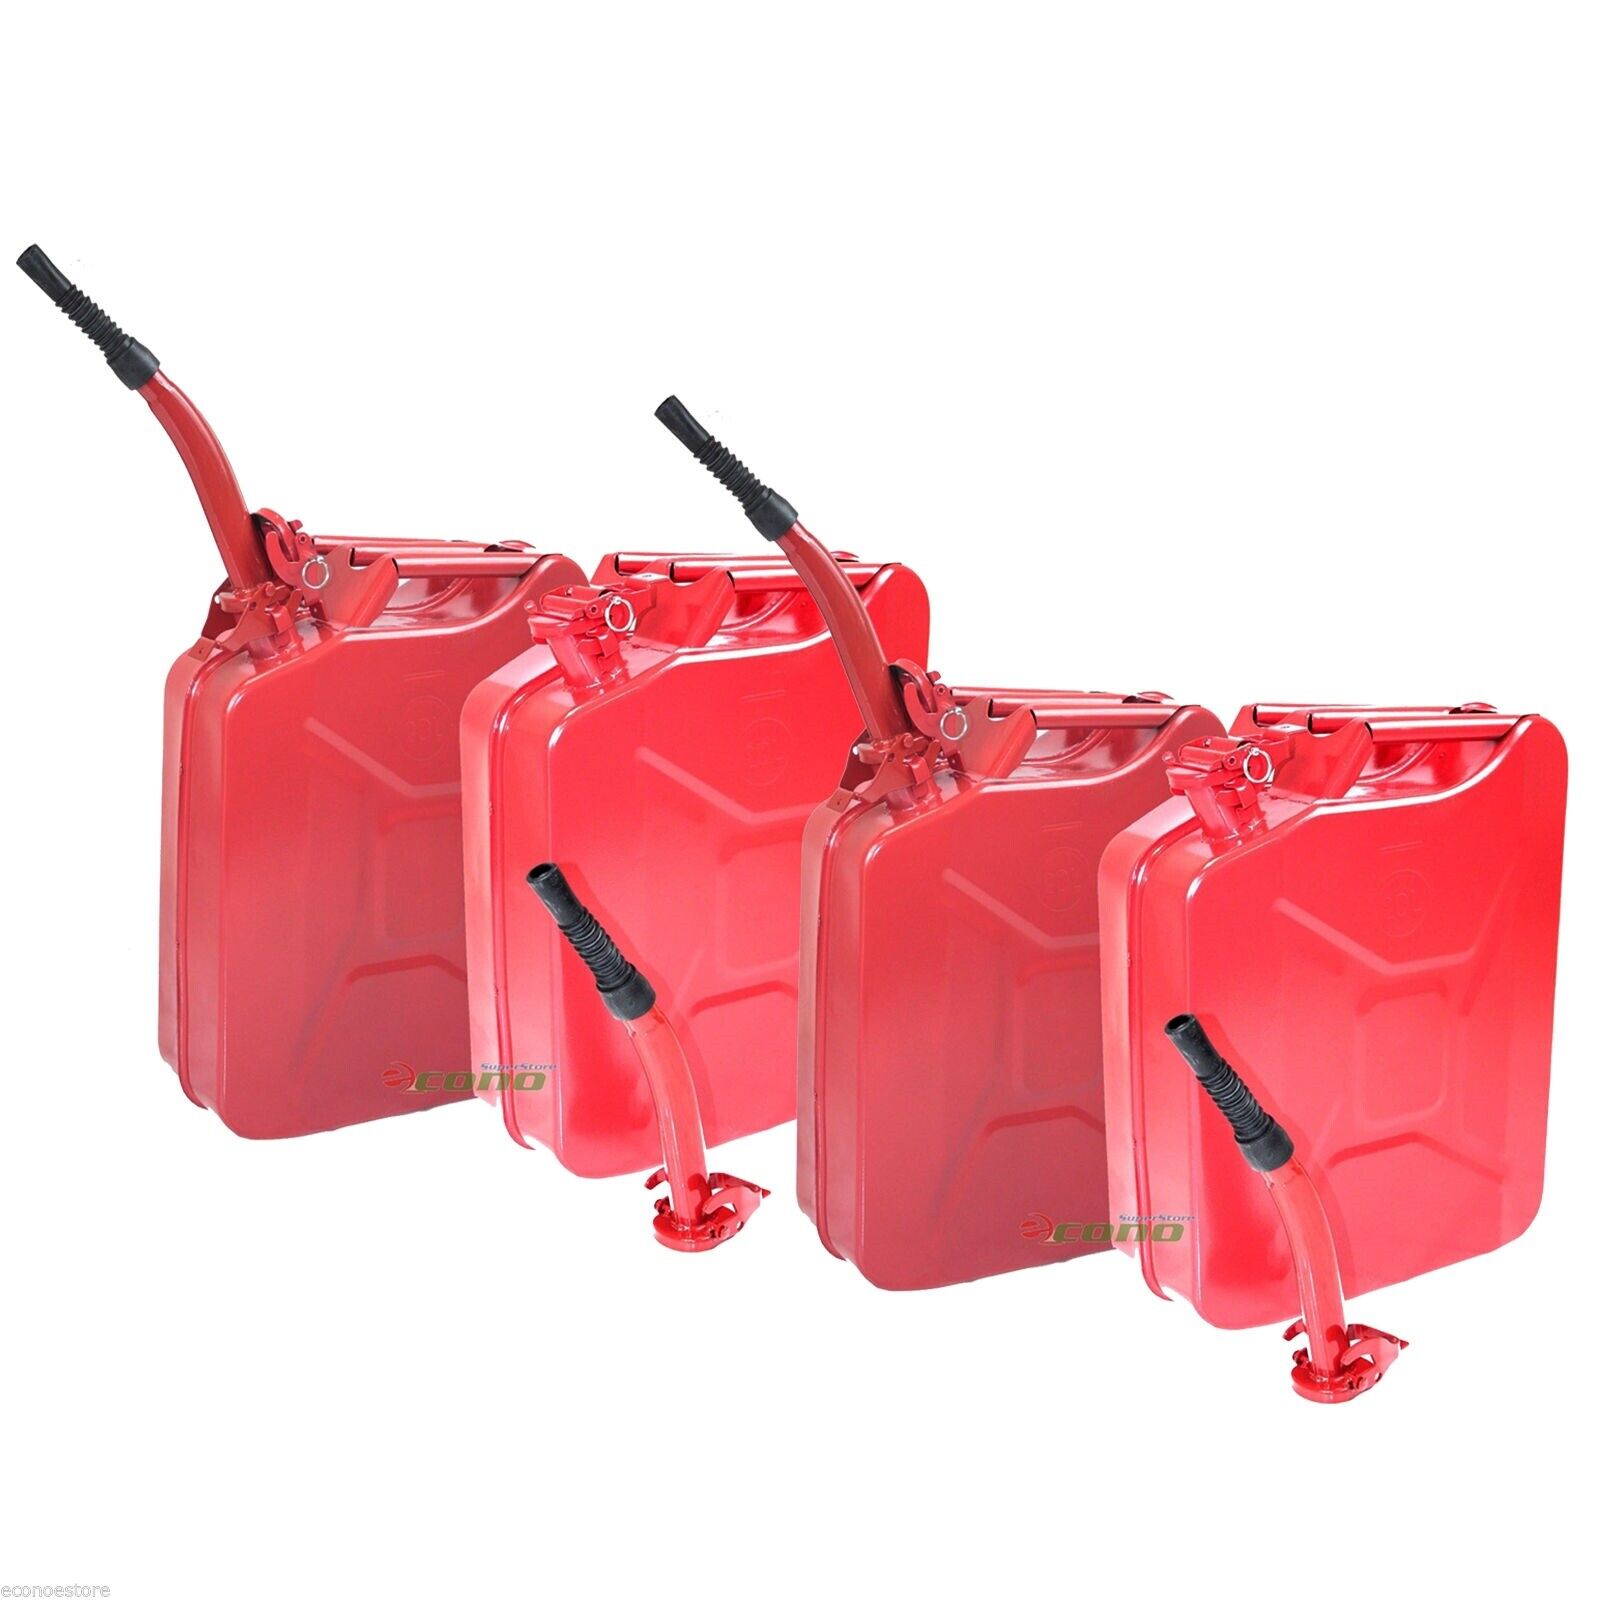 Lot 4 RED 5 Gallon Jerry Can Gasoline Steel Tank Military Style Storage Can Unbranded/Generic Does Not Apply